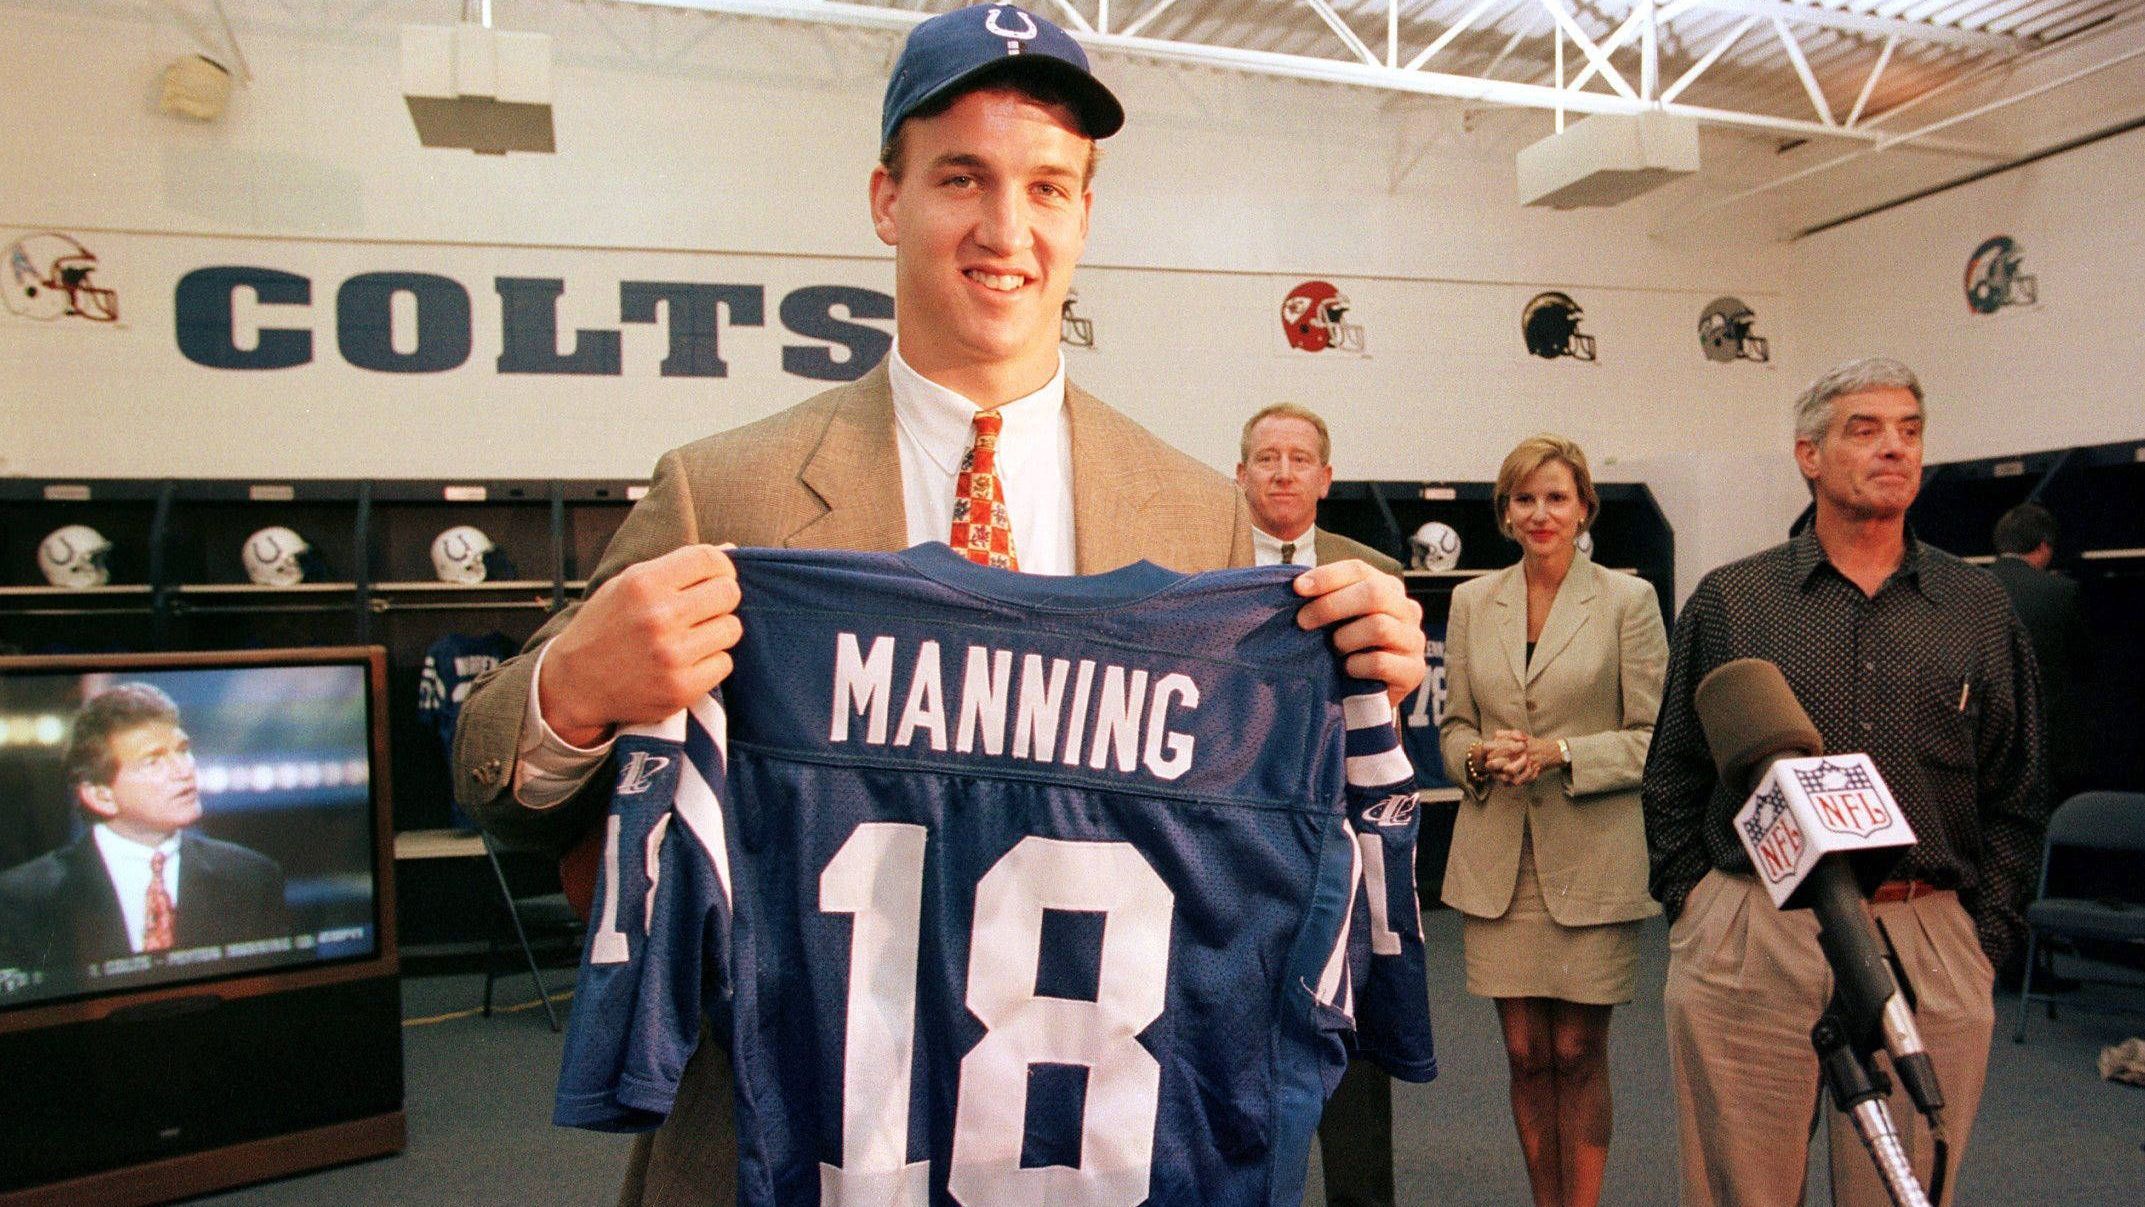 <strong>Peyton Manning - 1998</strong><br>Position: Quarterback<br>Draft-Team: Indianapolis Colts<br>Erfolge: 7x Pro Bowl, Super Bowl Champion, Pro Football Hall of Fame<br>Karriereende: 2015